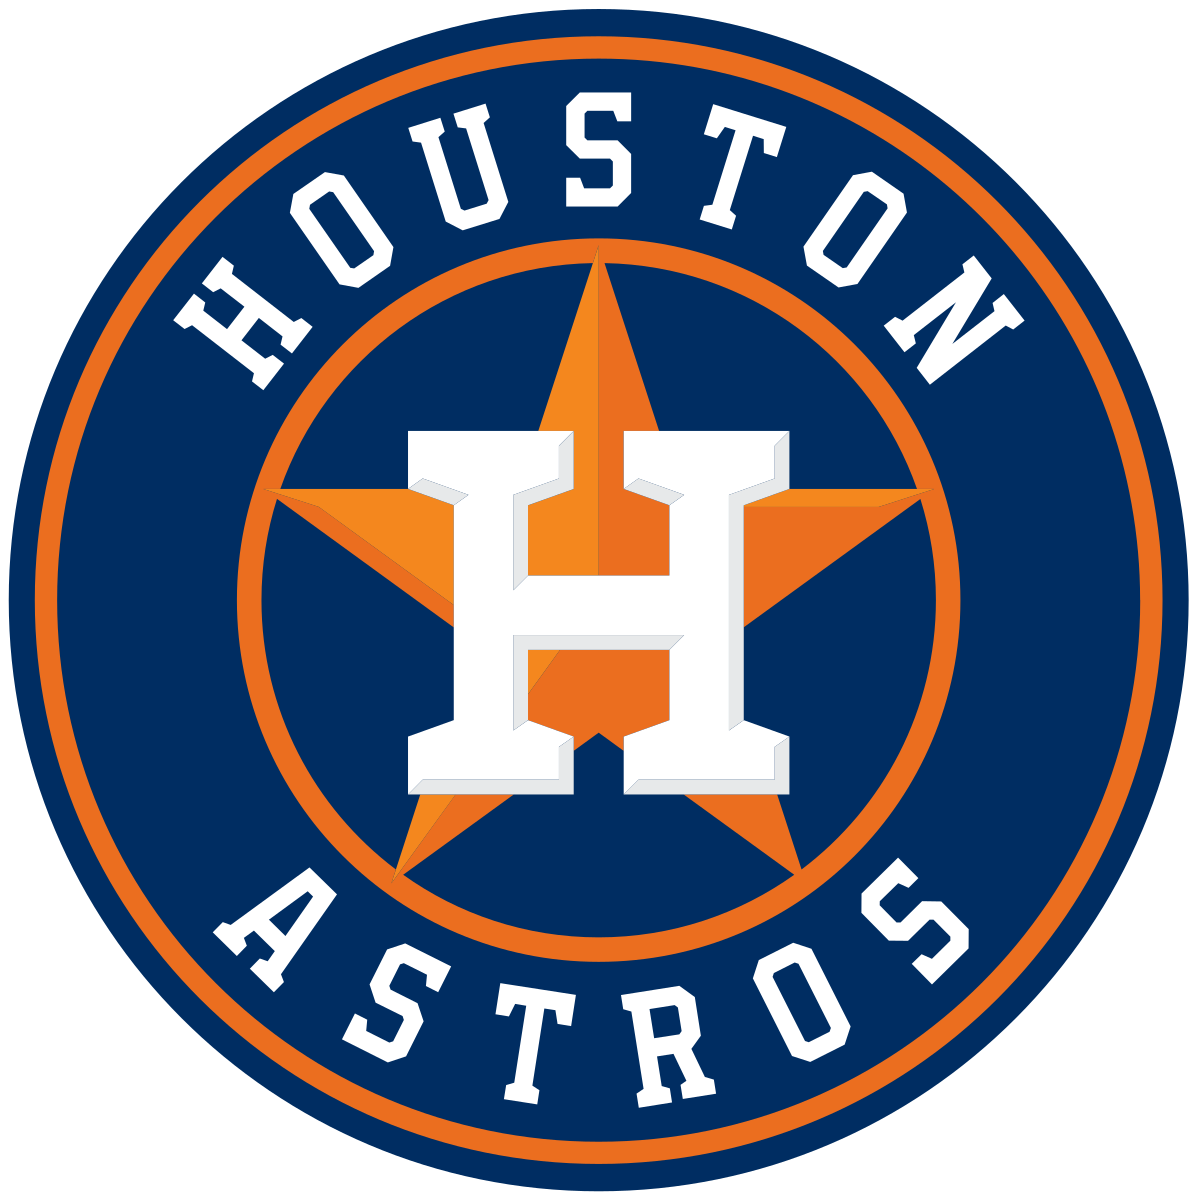 Astros cheating scandal now part of the fabric of baseball